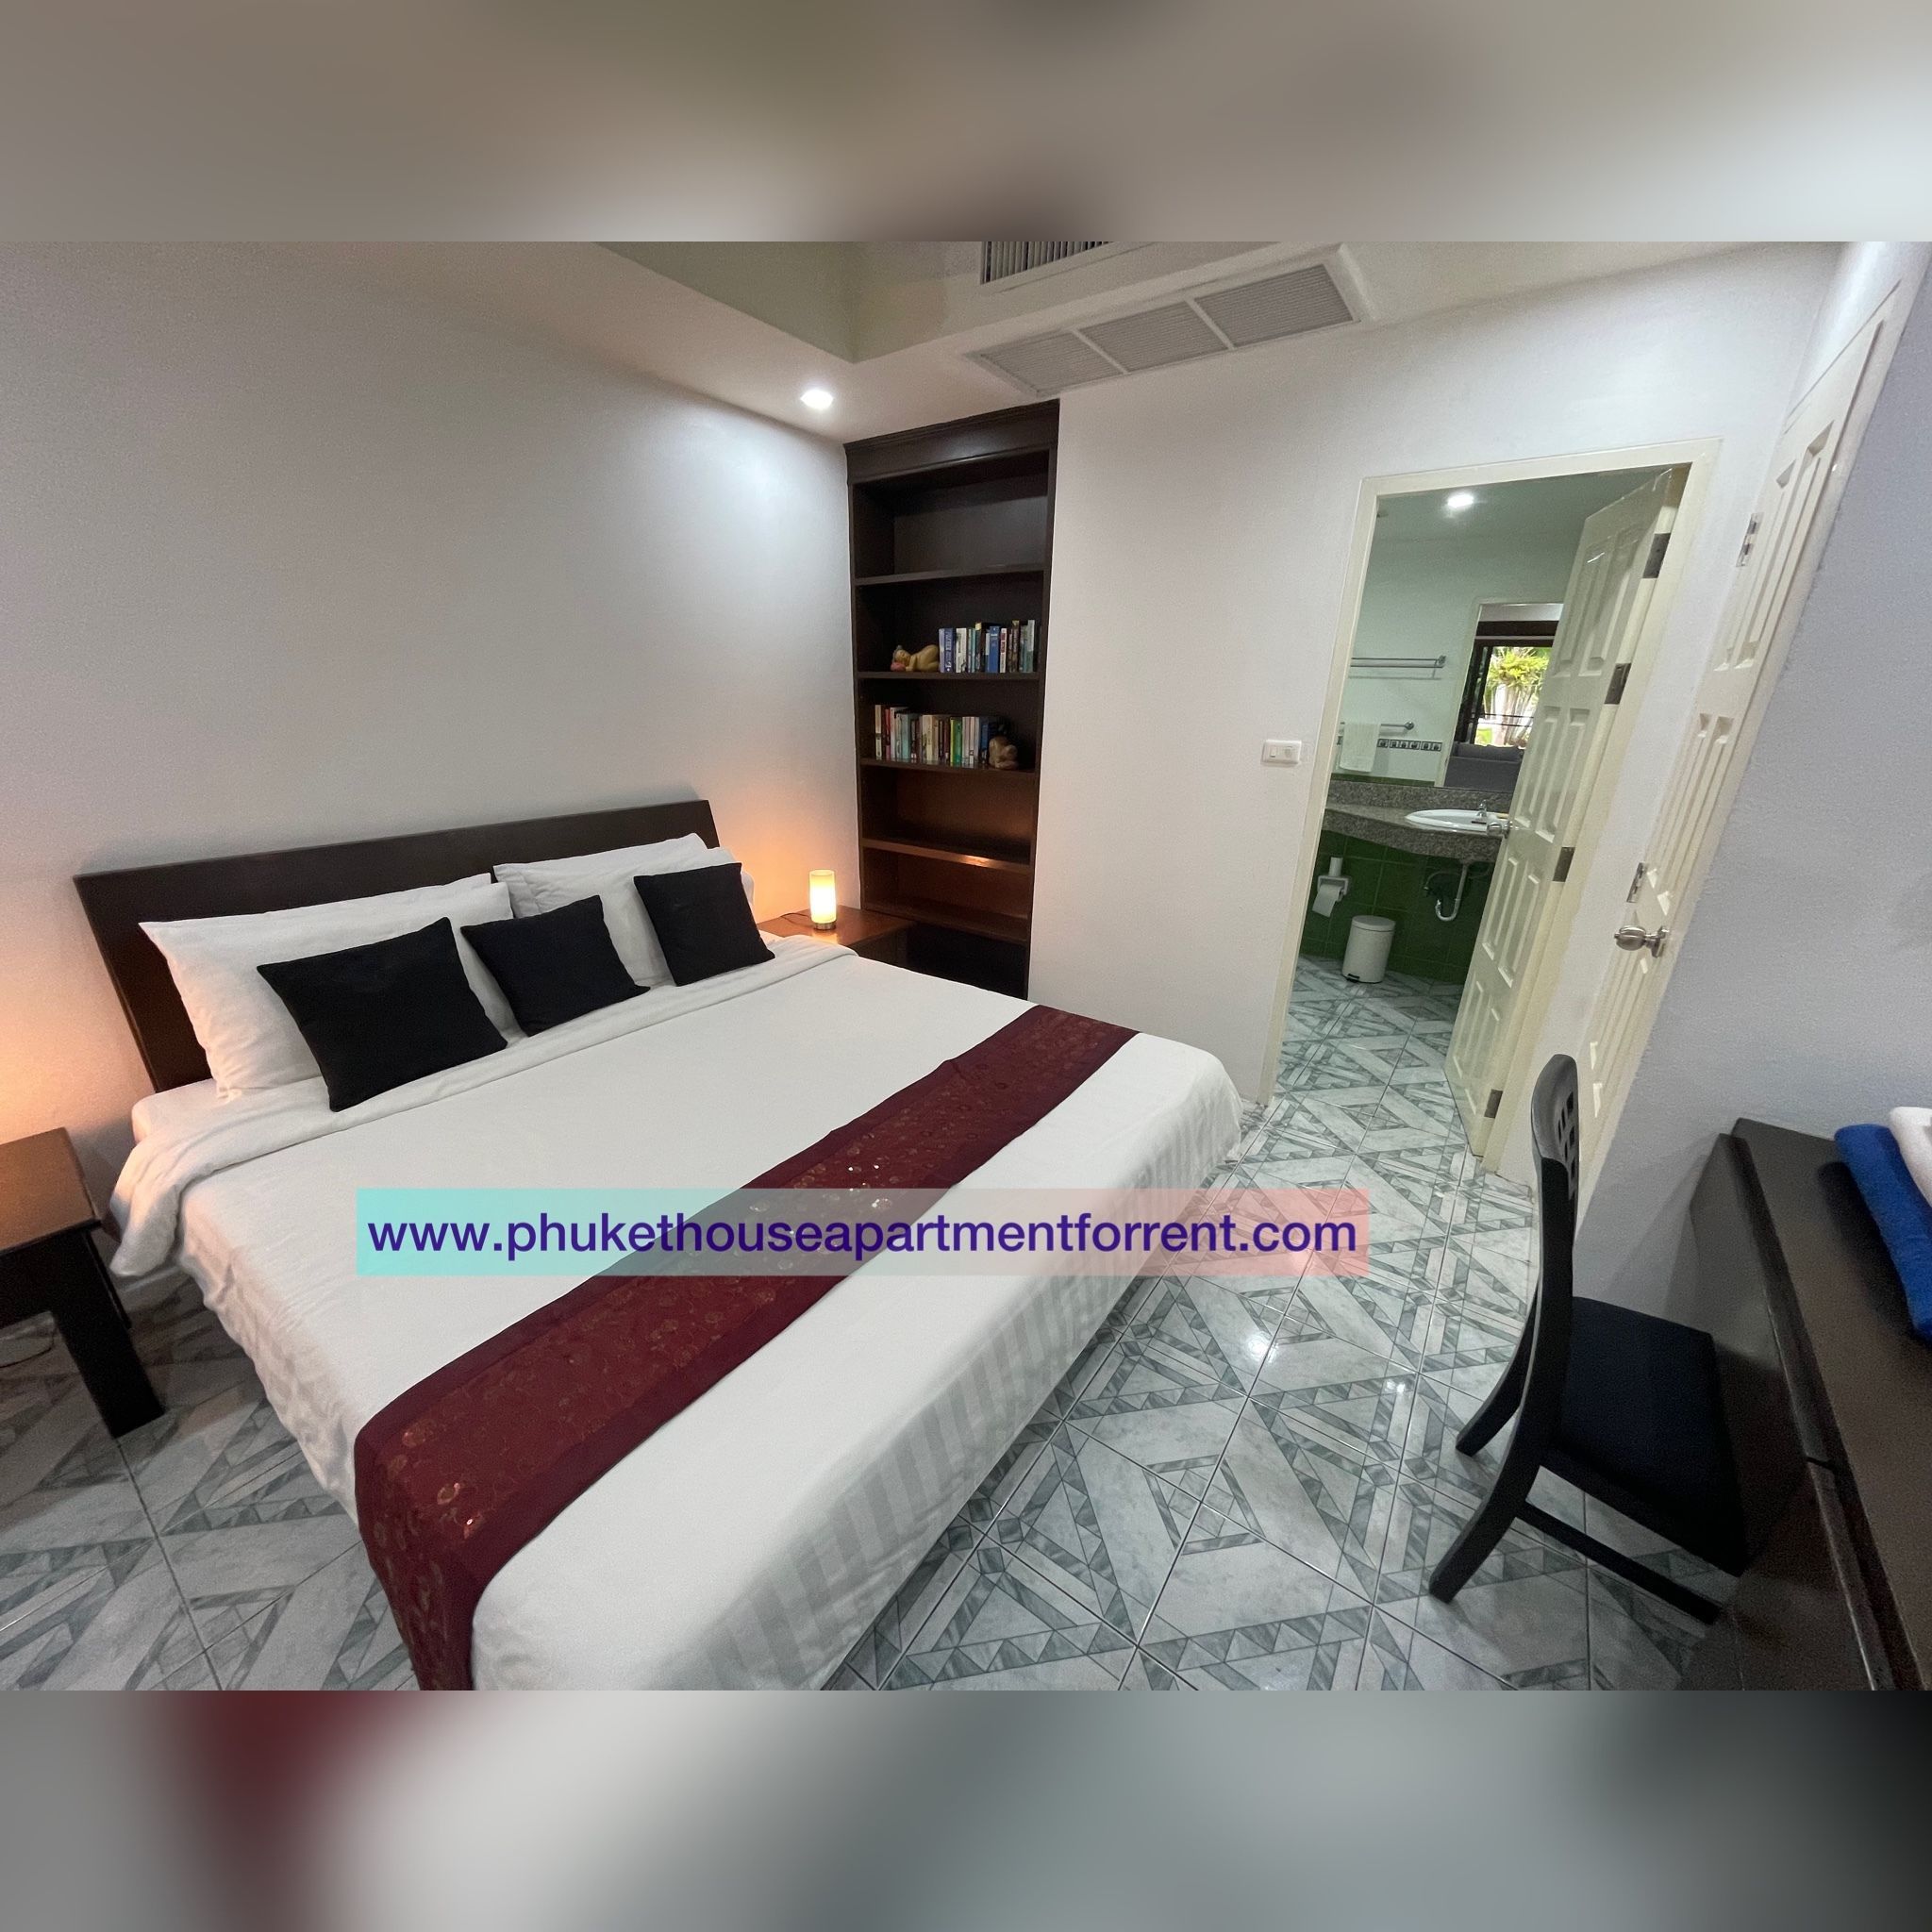 2 Bedrooms apartment for rent/ Kamala